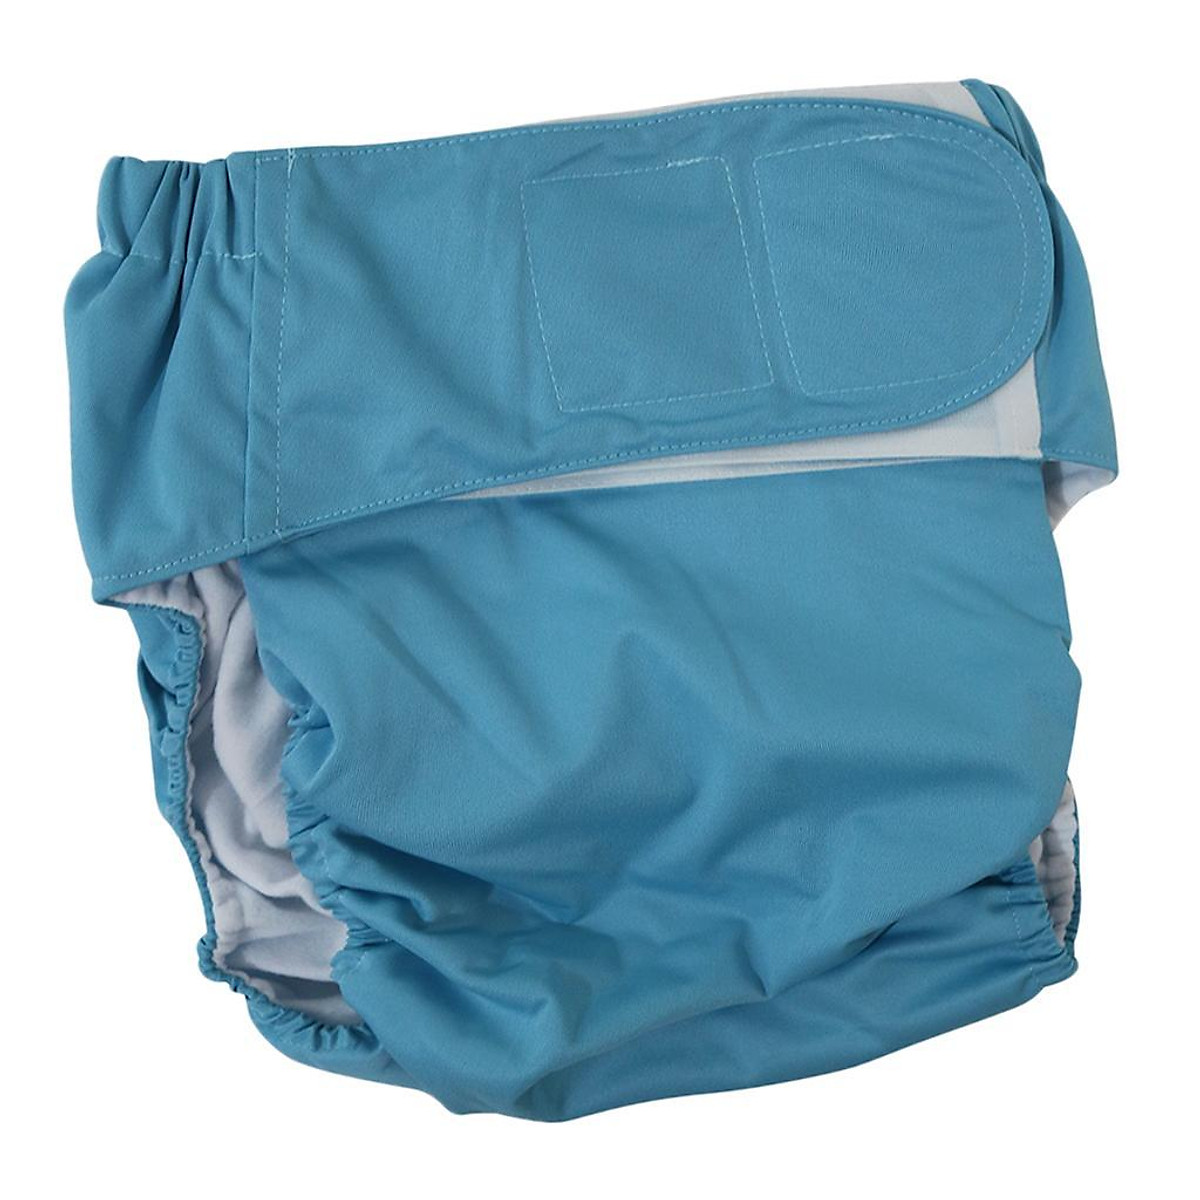 Cloth Diapers for Adults